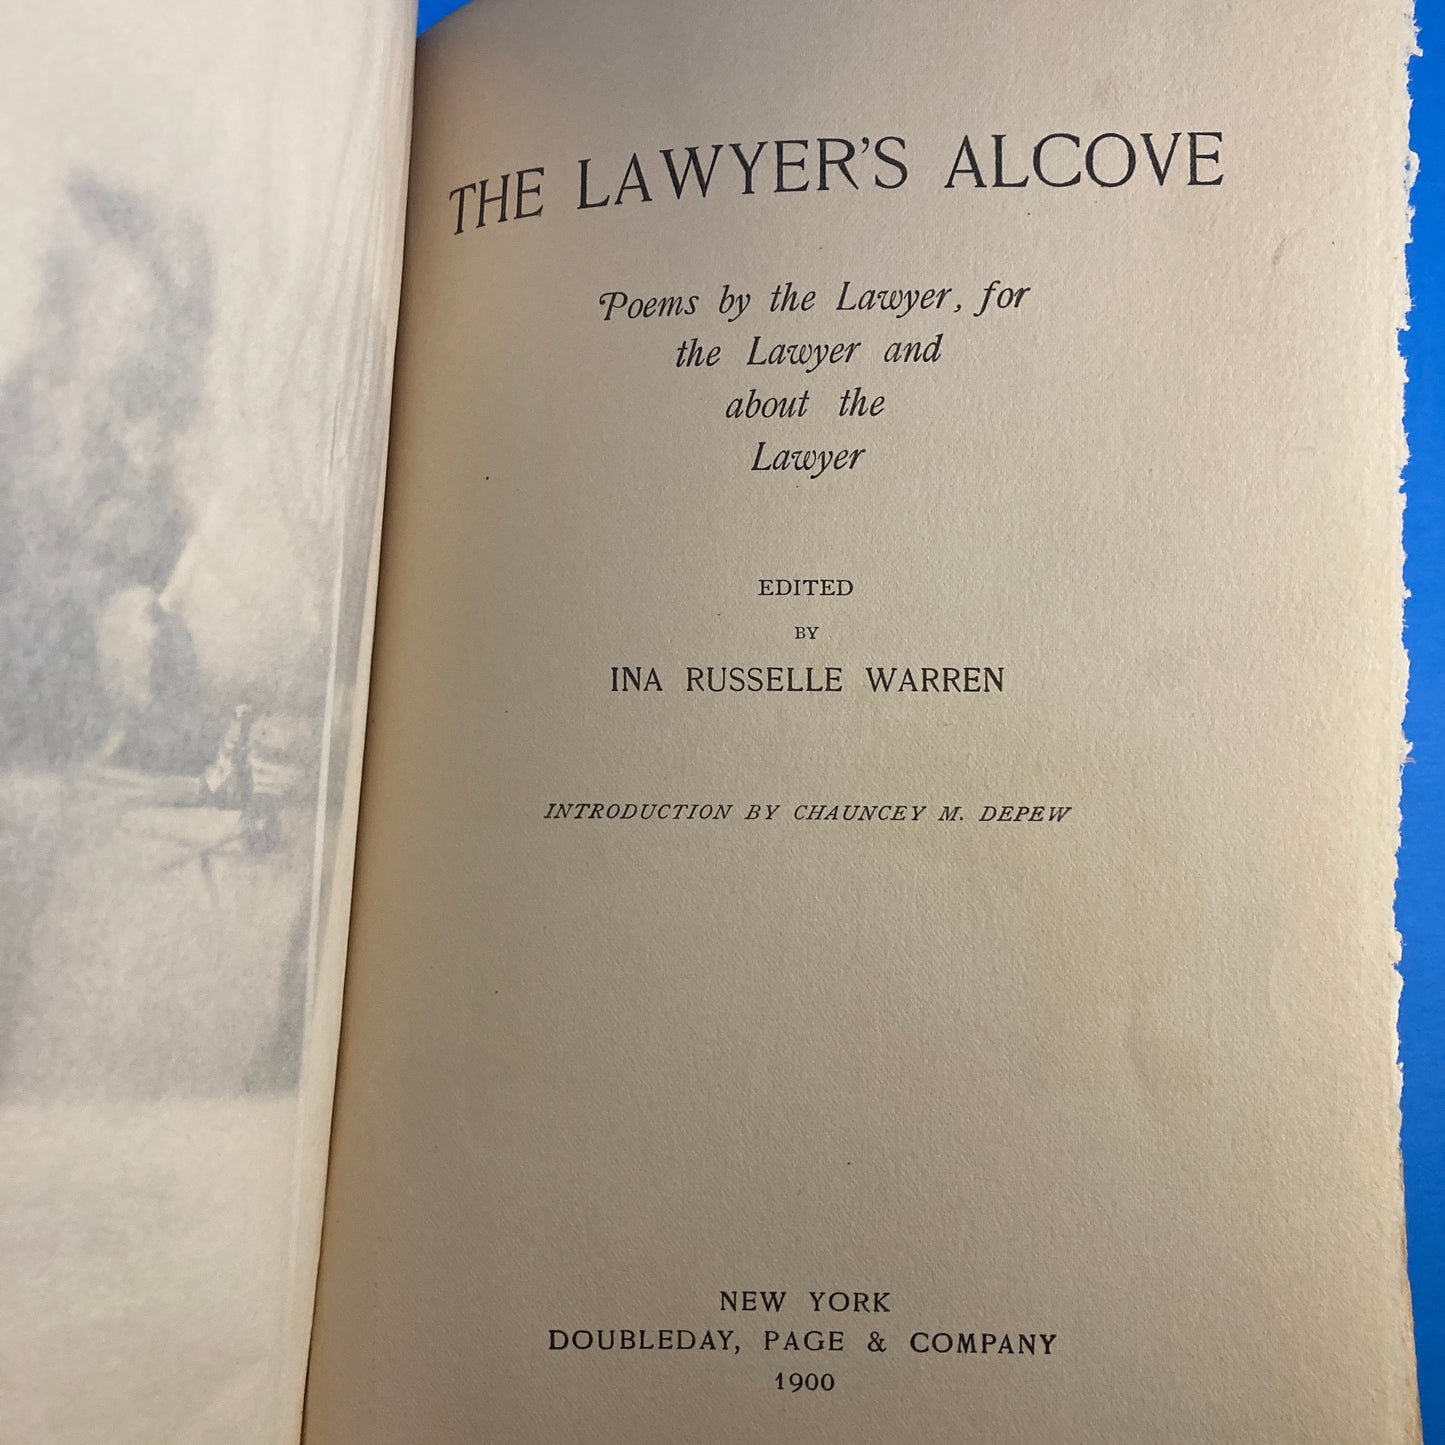 The Lawyer's Alcove